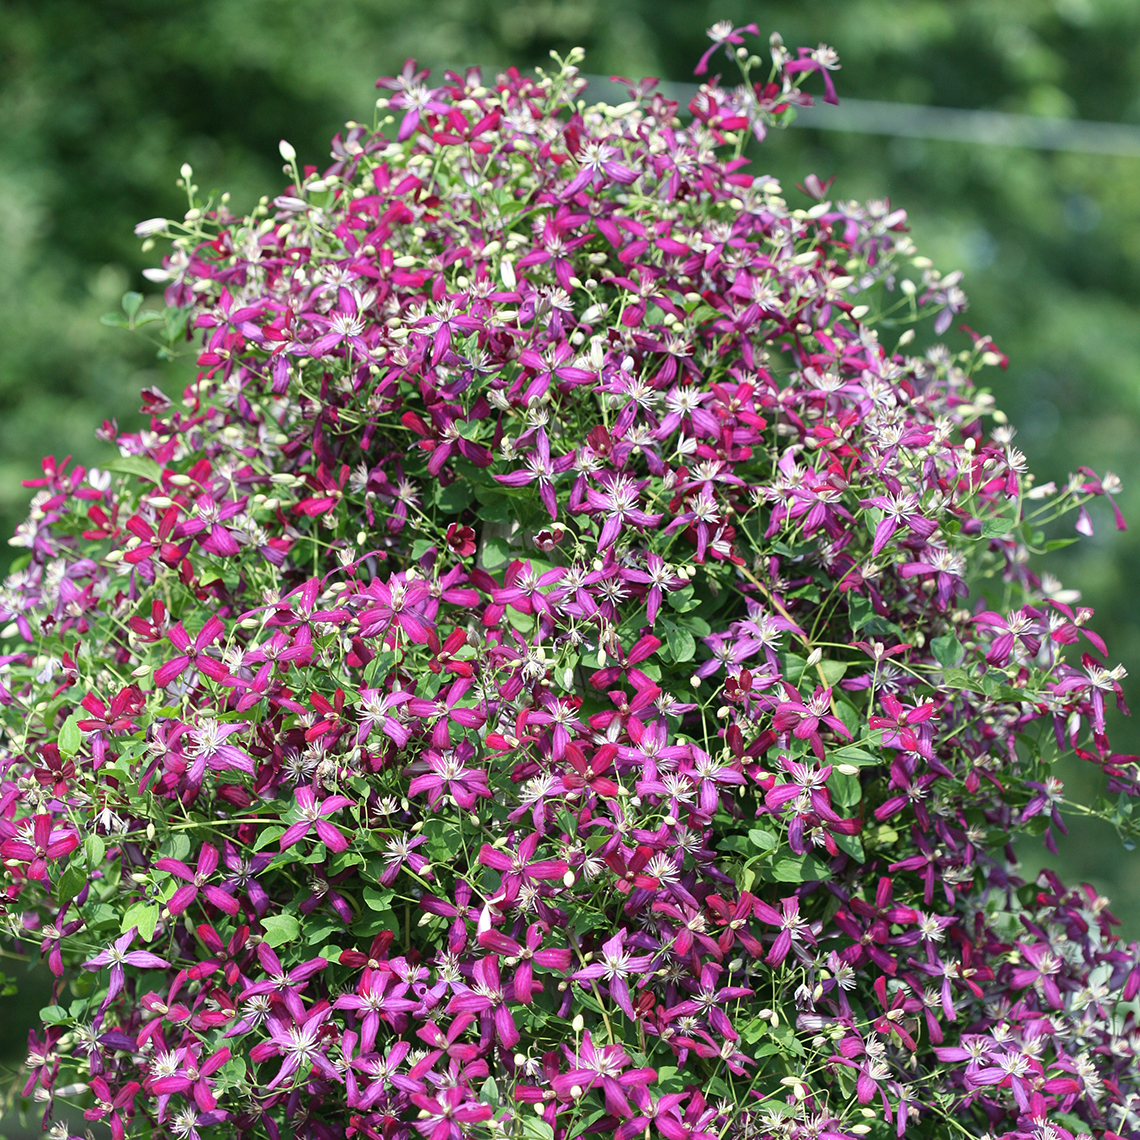 Peaked form covered in colorful Clematis Sweet Summer Love